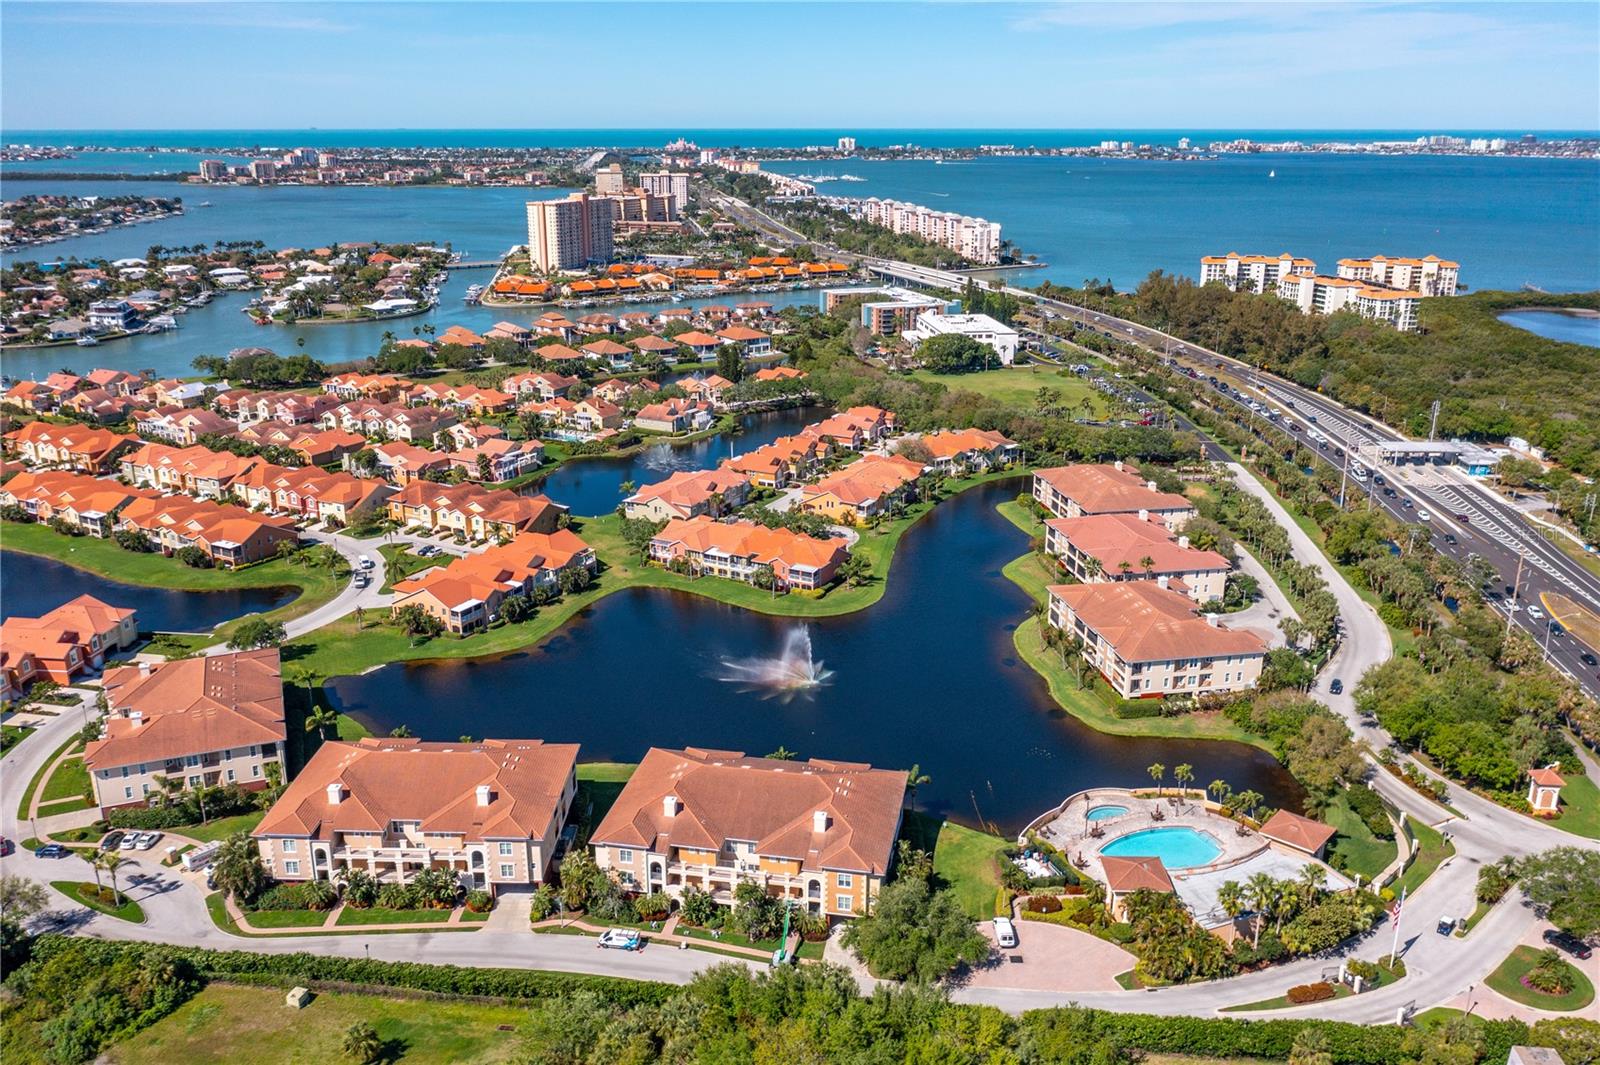 West facing photo of the Marina Bay community toward St. Pete Beach and Ft. DeSoto Park.